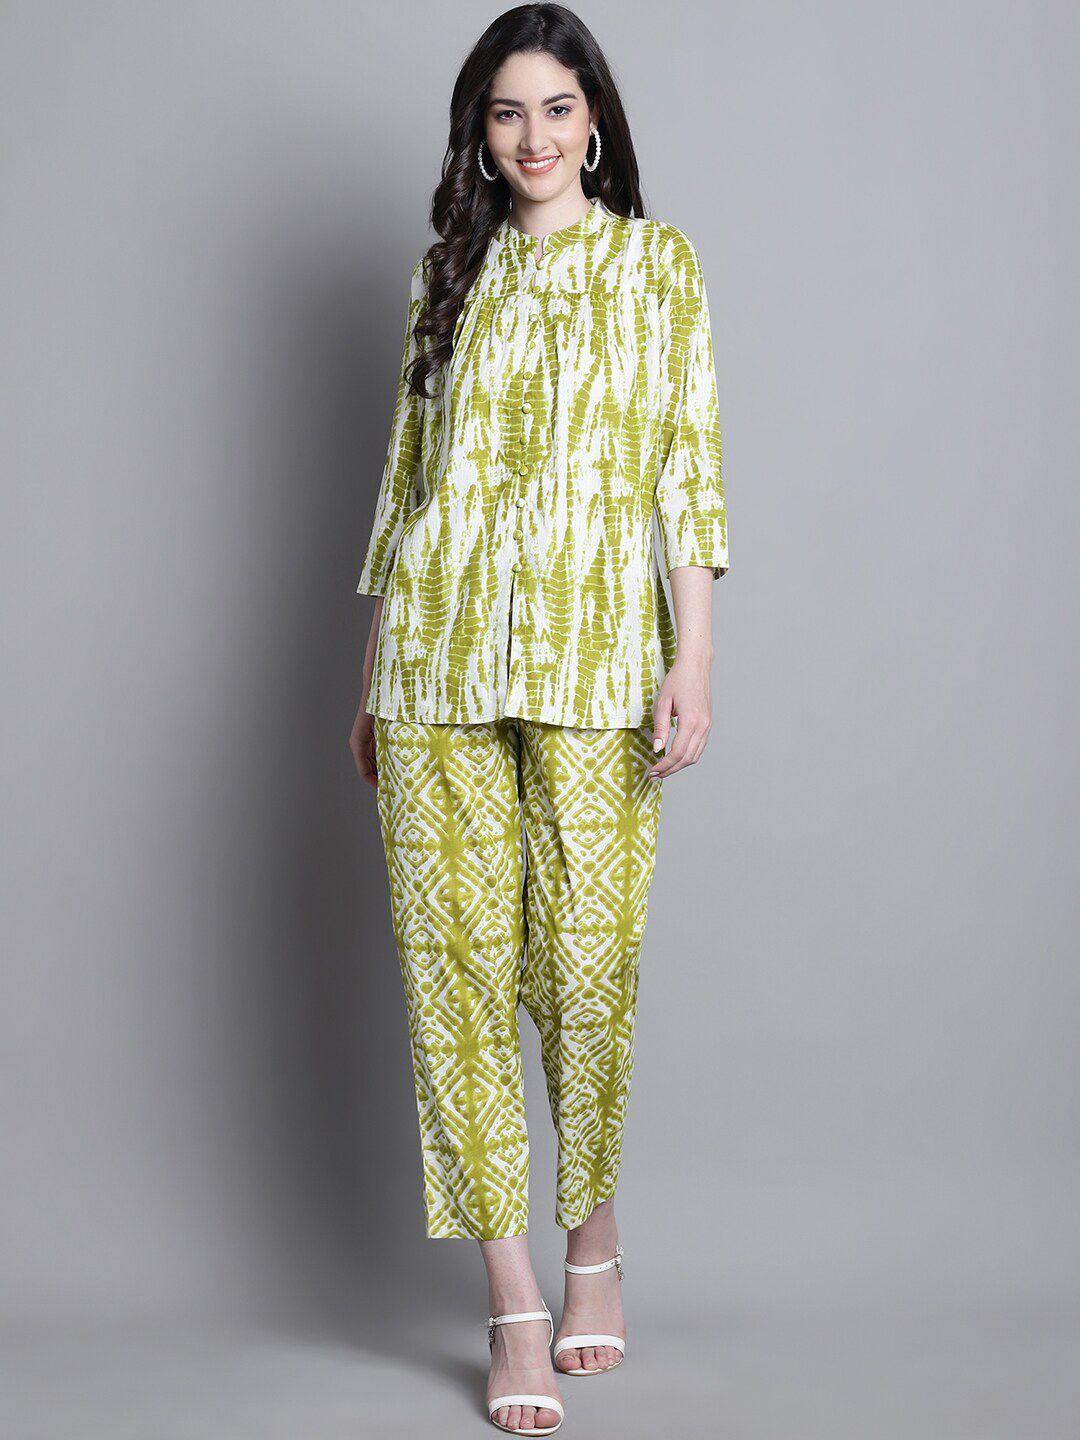 prakrti tie & dye printed pure cotton longline top with trousers